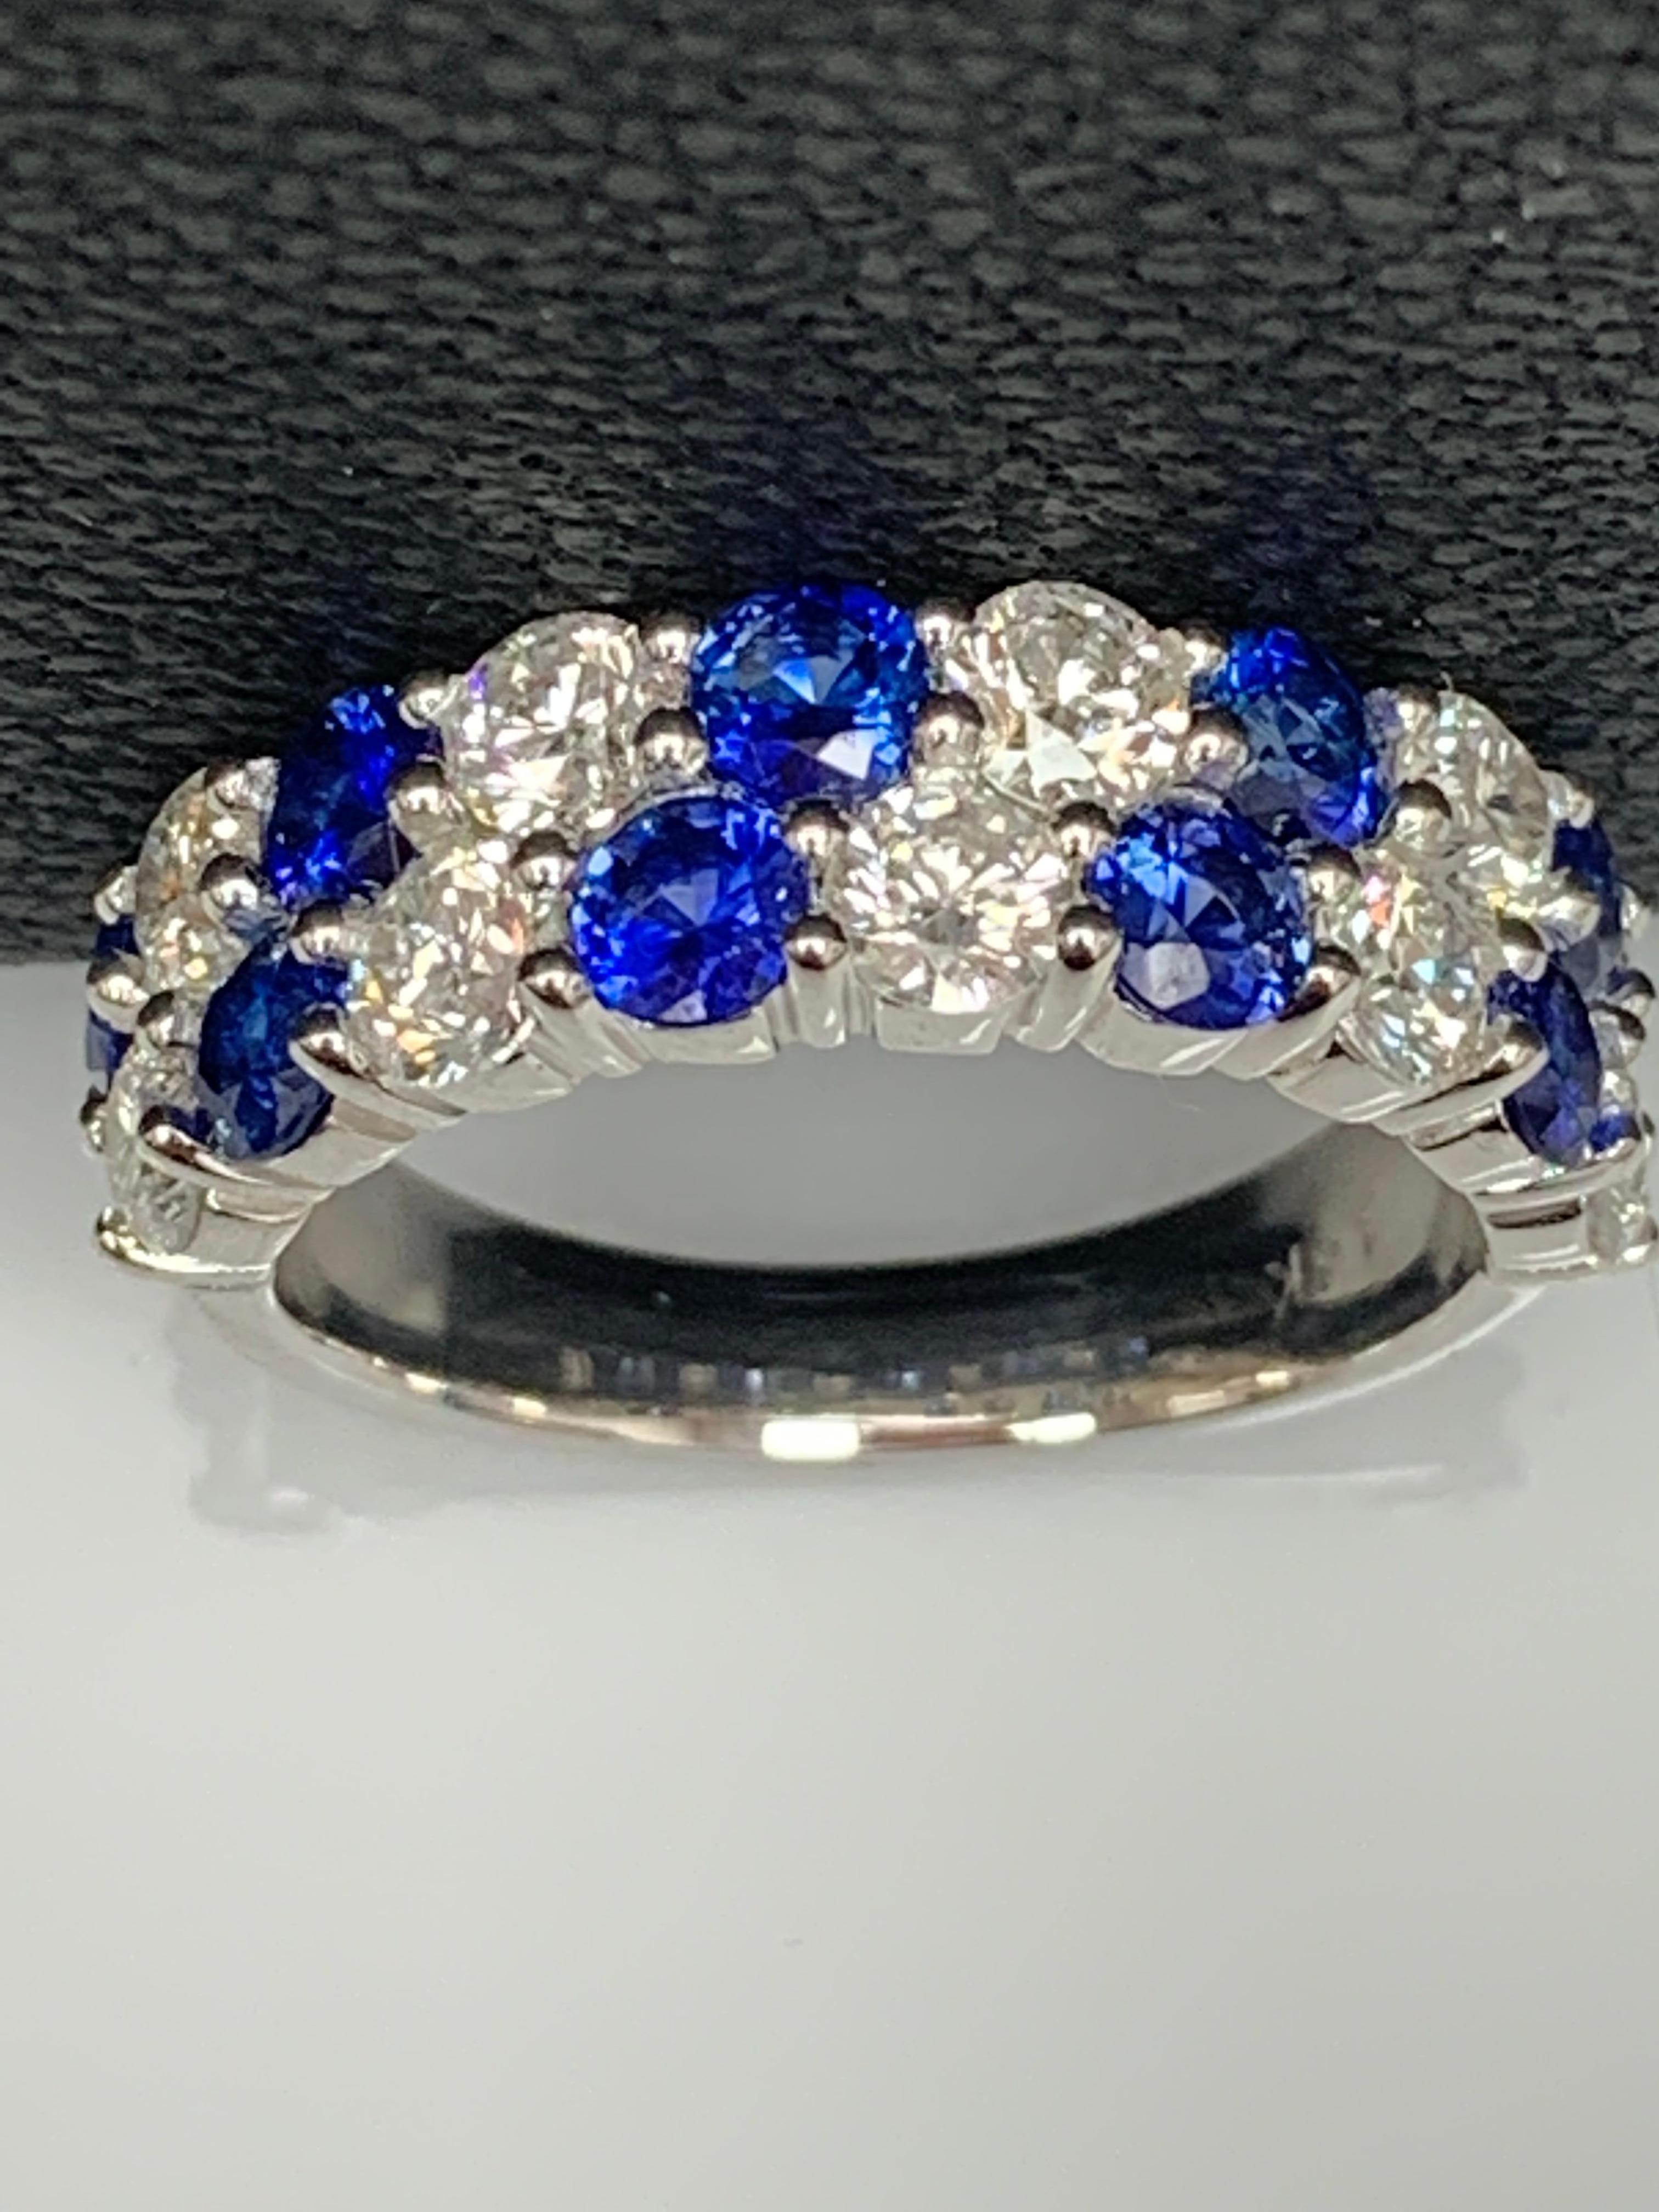 A unique and fashionable ZicZac ring showcasing two rows of round-shape 10 blue sapphires and 9 diamonds, set in a band design. Rubies weigh 1.50 carats and Diamonds weigh 1.52 carats total. A brilliant and masterfully-made piece.

Style available